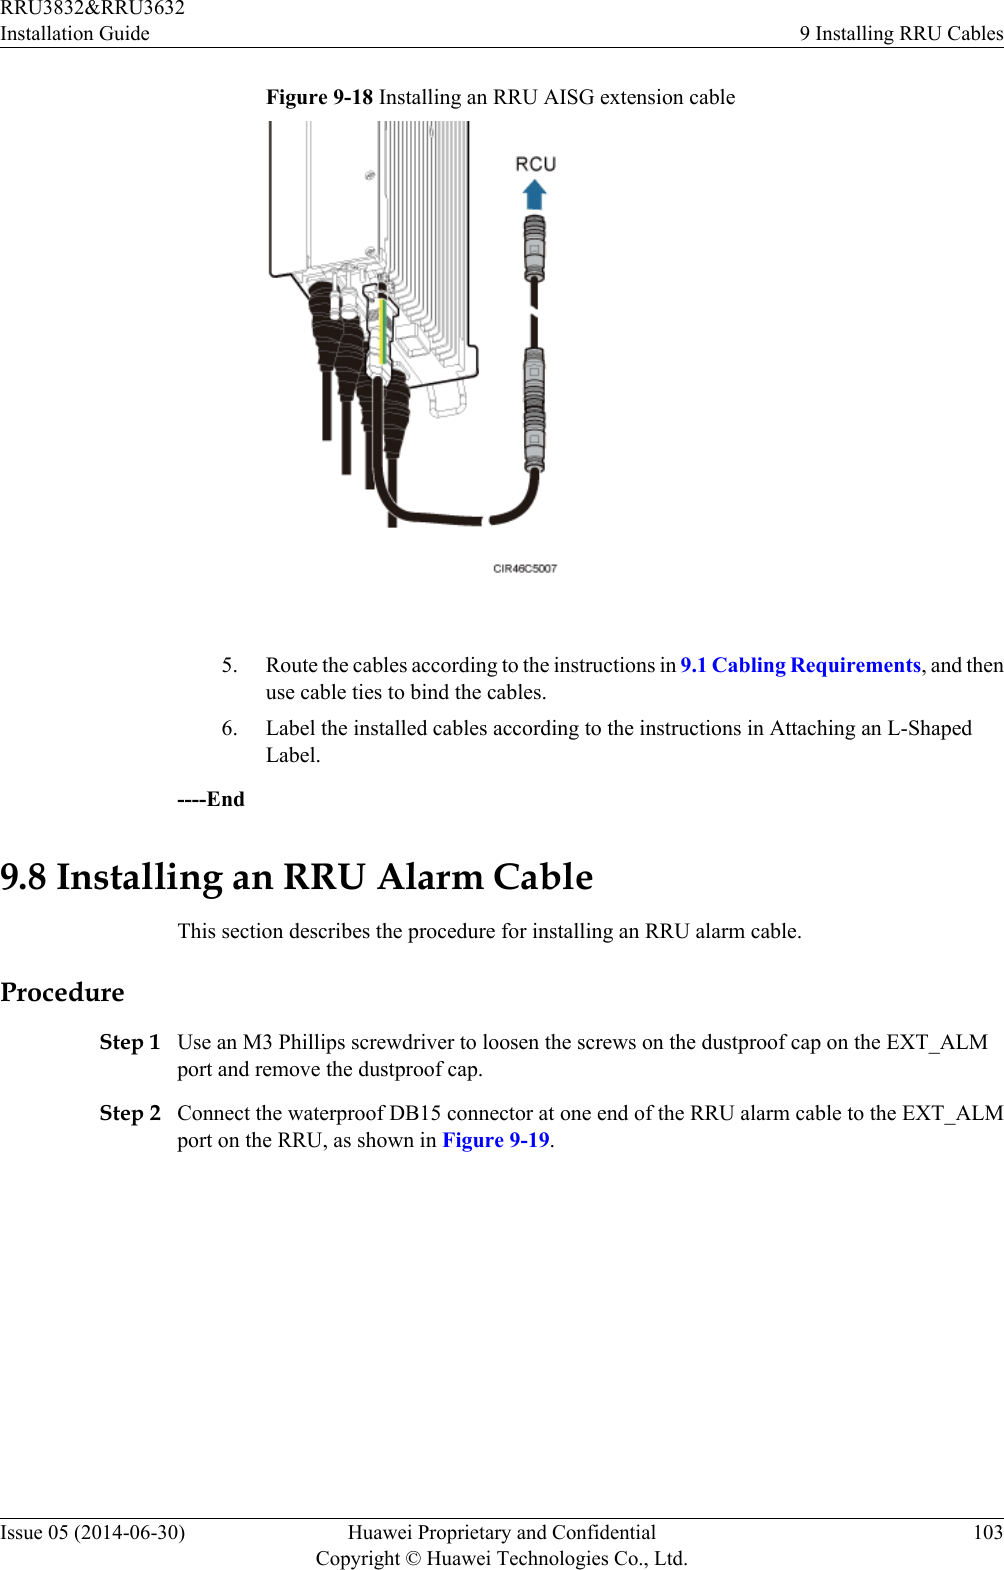 Figure 9-18 Installing an RRU AISG extension cable 5. Route the cables according to the instructions in 9.1 Cabling Requirements, and thenuse cable ties to bind the cables.6. Label the installed cables according to the instructions in Attaching an L-ShapedLabel.----End9.8 Installing an RRU Alarm CableThis section describes the procedure for installing an RRU alarm cable.ProcedureStep 1 Use an M3 Phillips screwdriver to loosen the screws on the dustproof cap on the EXT_ALMport and remove the dustproof cap.Step 2 Connect the waterproof DB15 connector at one end of the RRU alarm cable to the EXT_ALMport on the RRU, as shown in Figure 9-19.RRU3832&amp;RRU3632Installation Guide 9 Installing RRU CablesIssue 05 (2014-06-30) Huawei Proprietary and ConfidentialCopyright © Huawei Technologies Co., Ltd.103